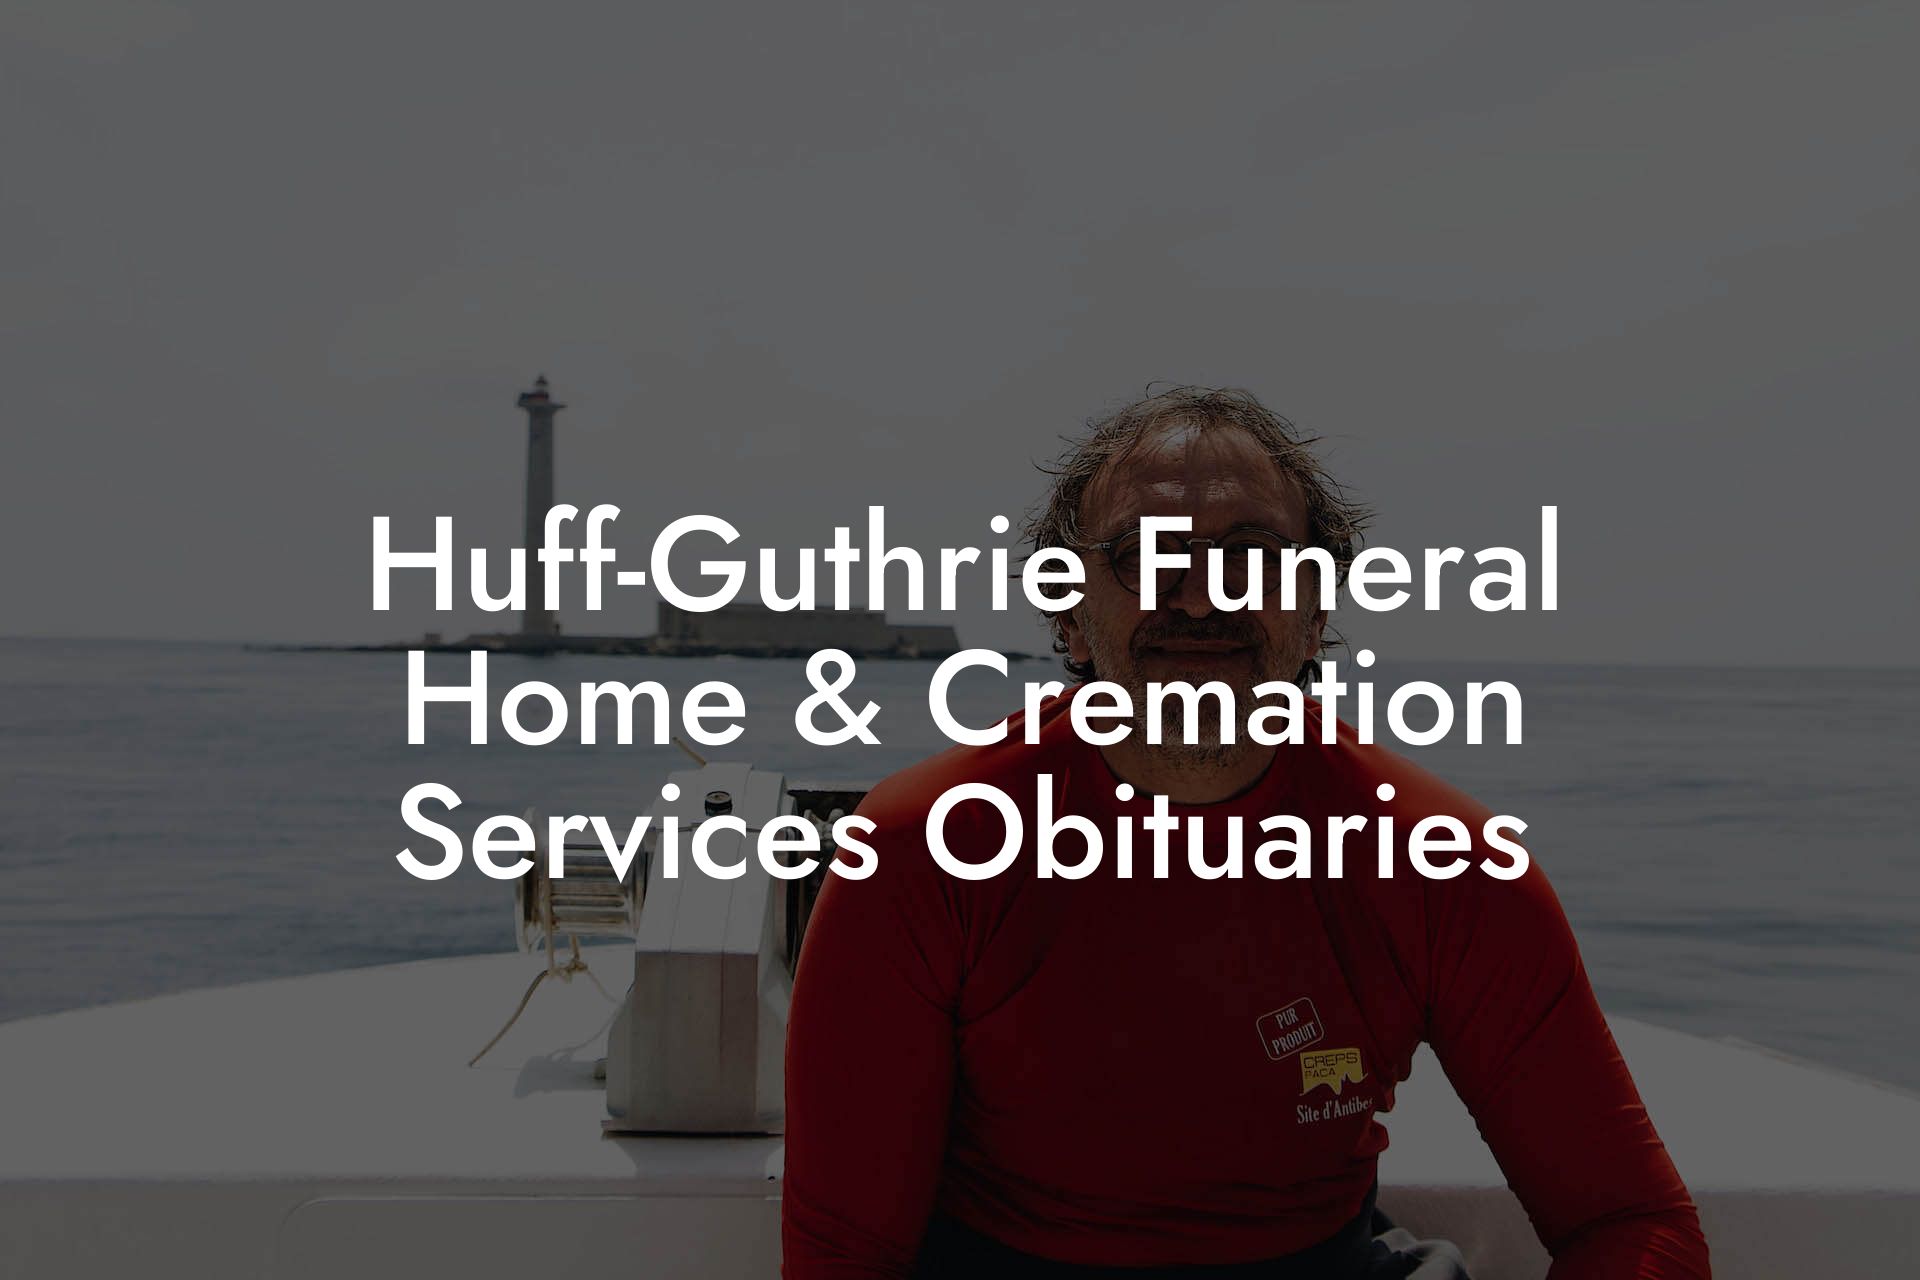 Huff-Guthrie Funeral Home & Cremation Services Obituaries